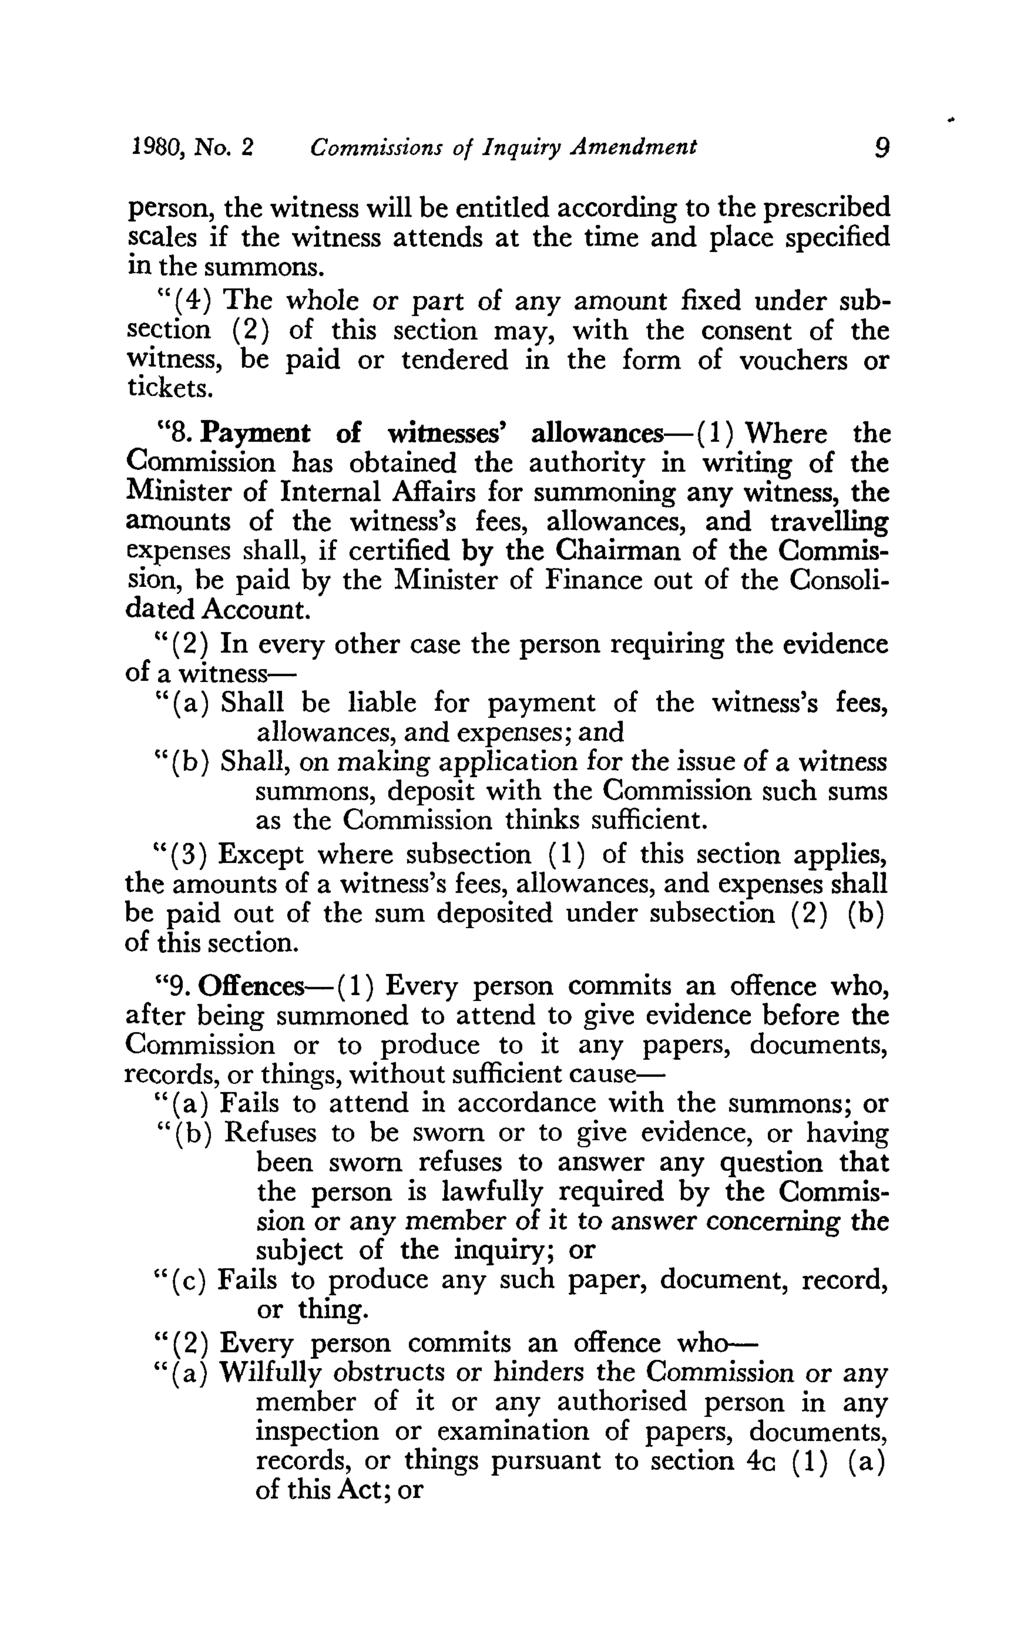 1980, No. 2 Commissions of Inquiry Amendment 9 person, the witness will be entitled according to the prescribed scales if the witness attends at the time and place specified in the summons.